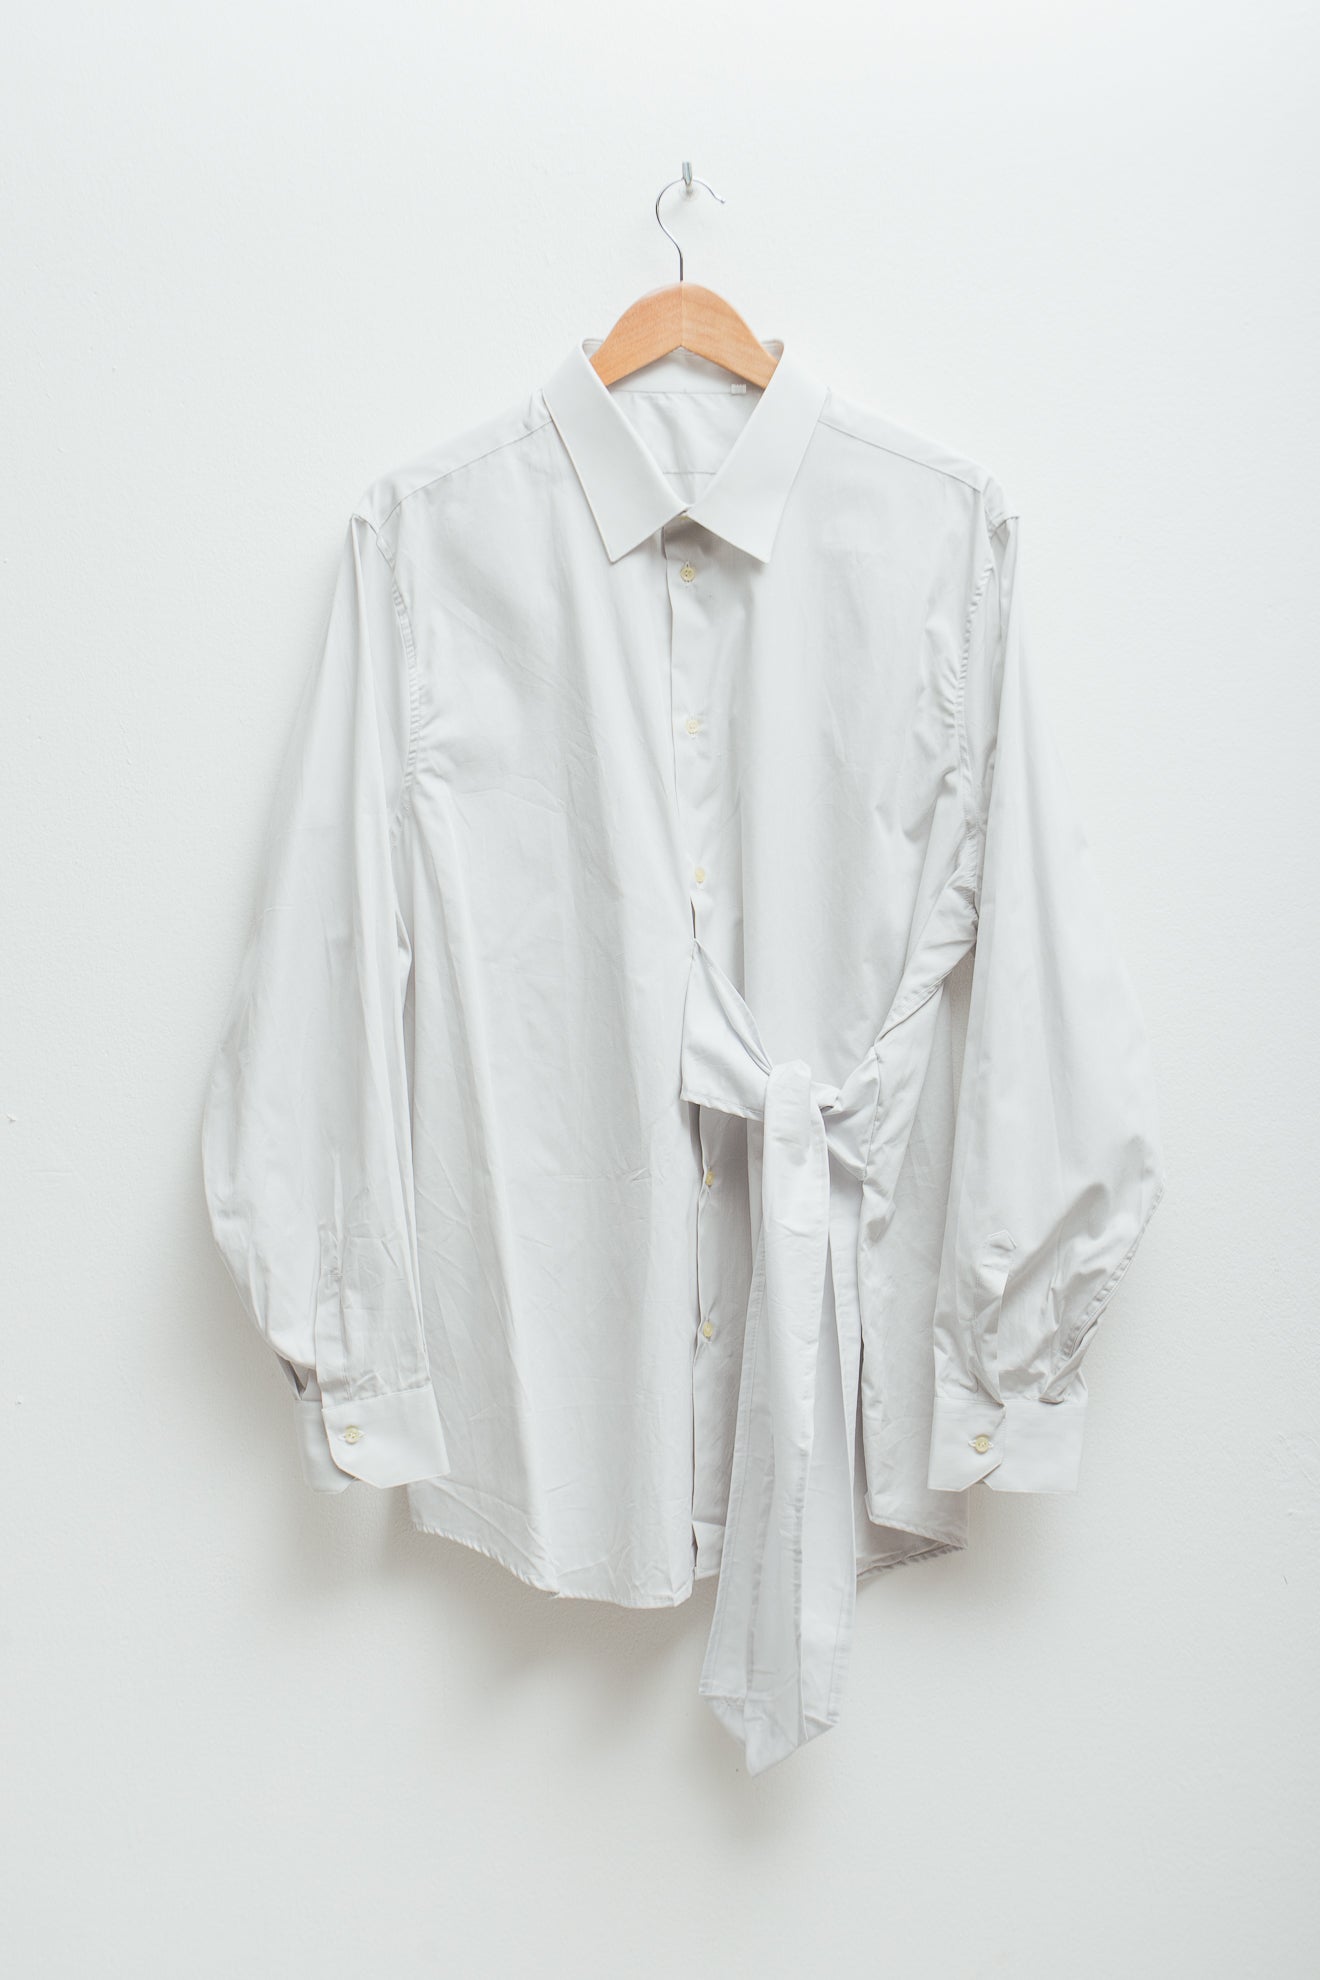 UPCYCLED SIDE KNOT SHIRT (M/L/XL)